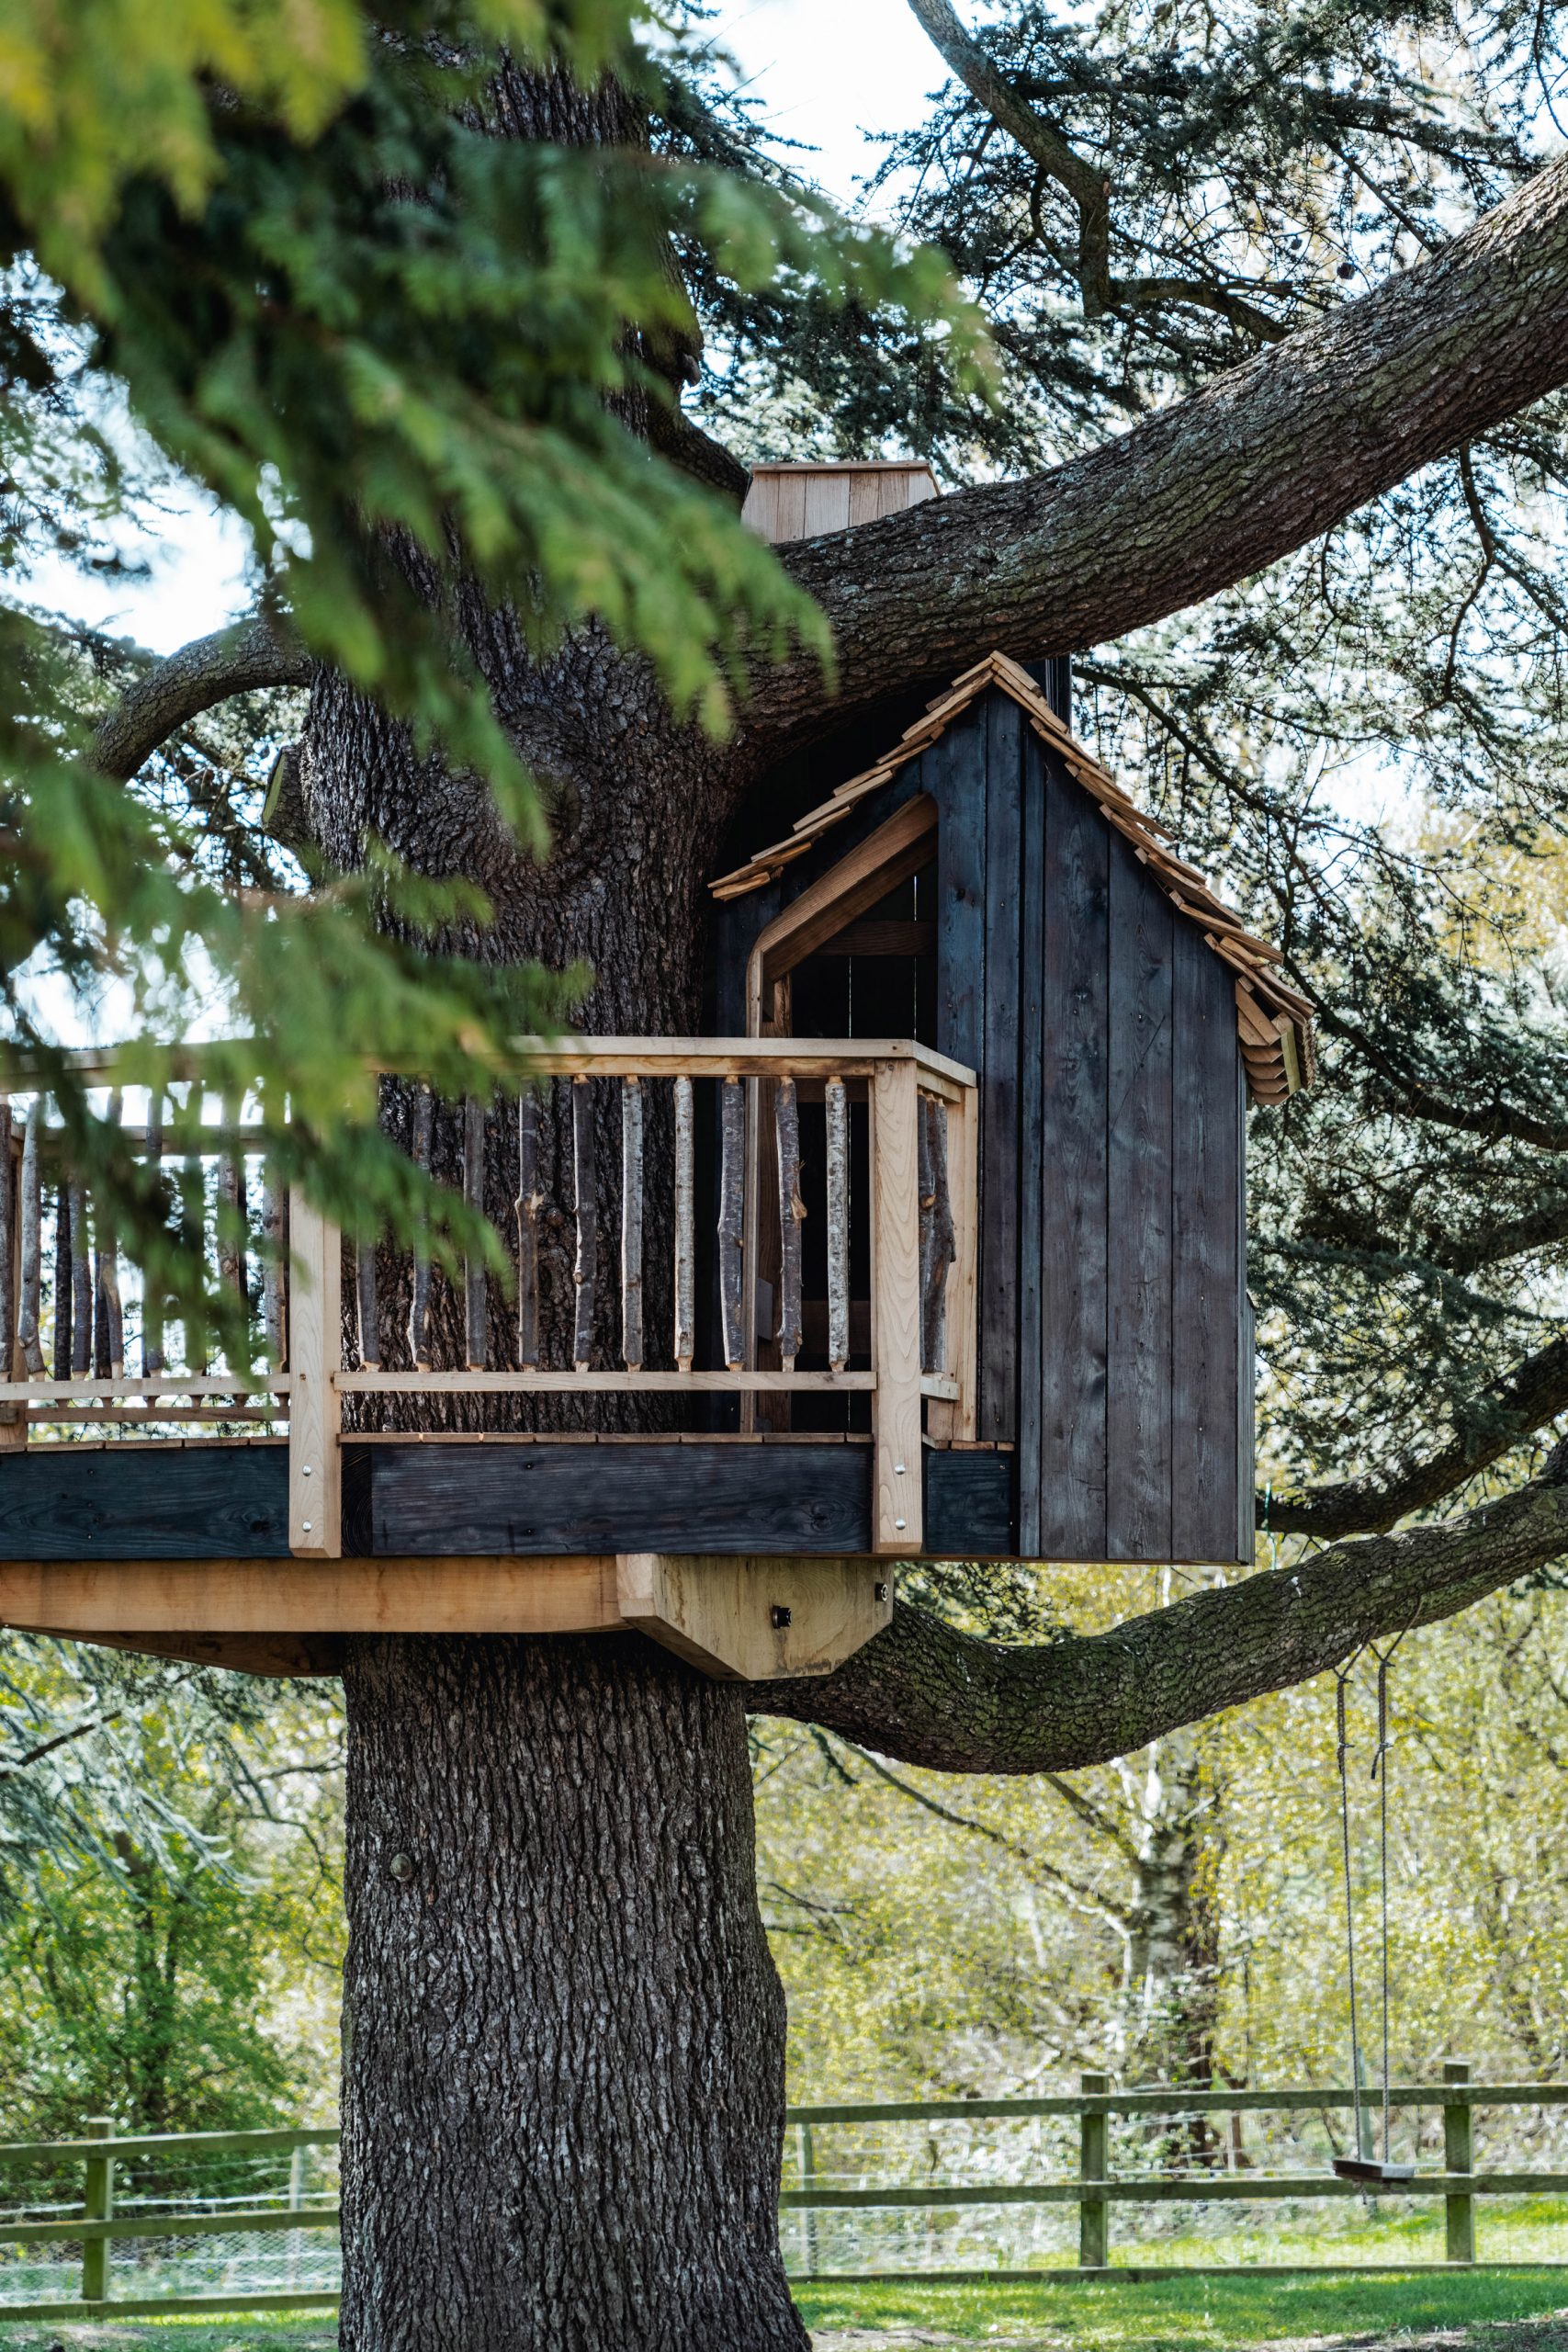 Cedar tree in the English countryside with a treehouse entrance